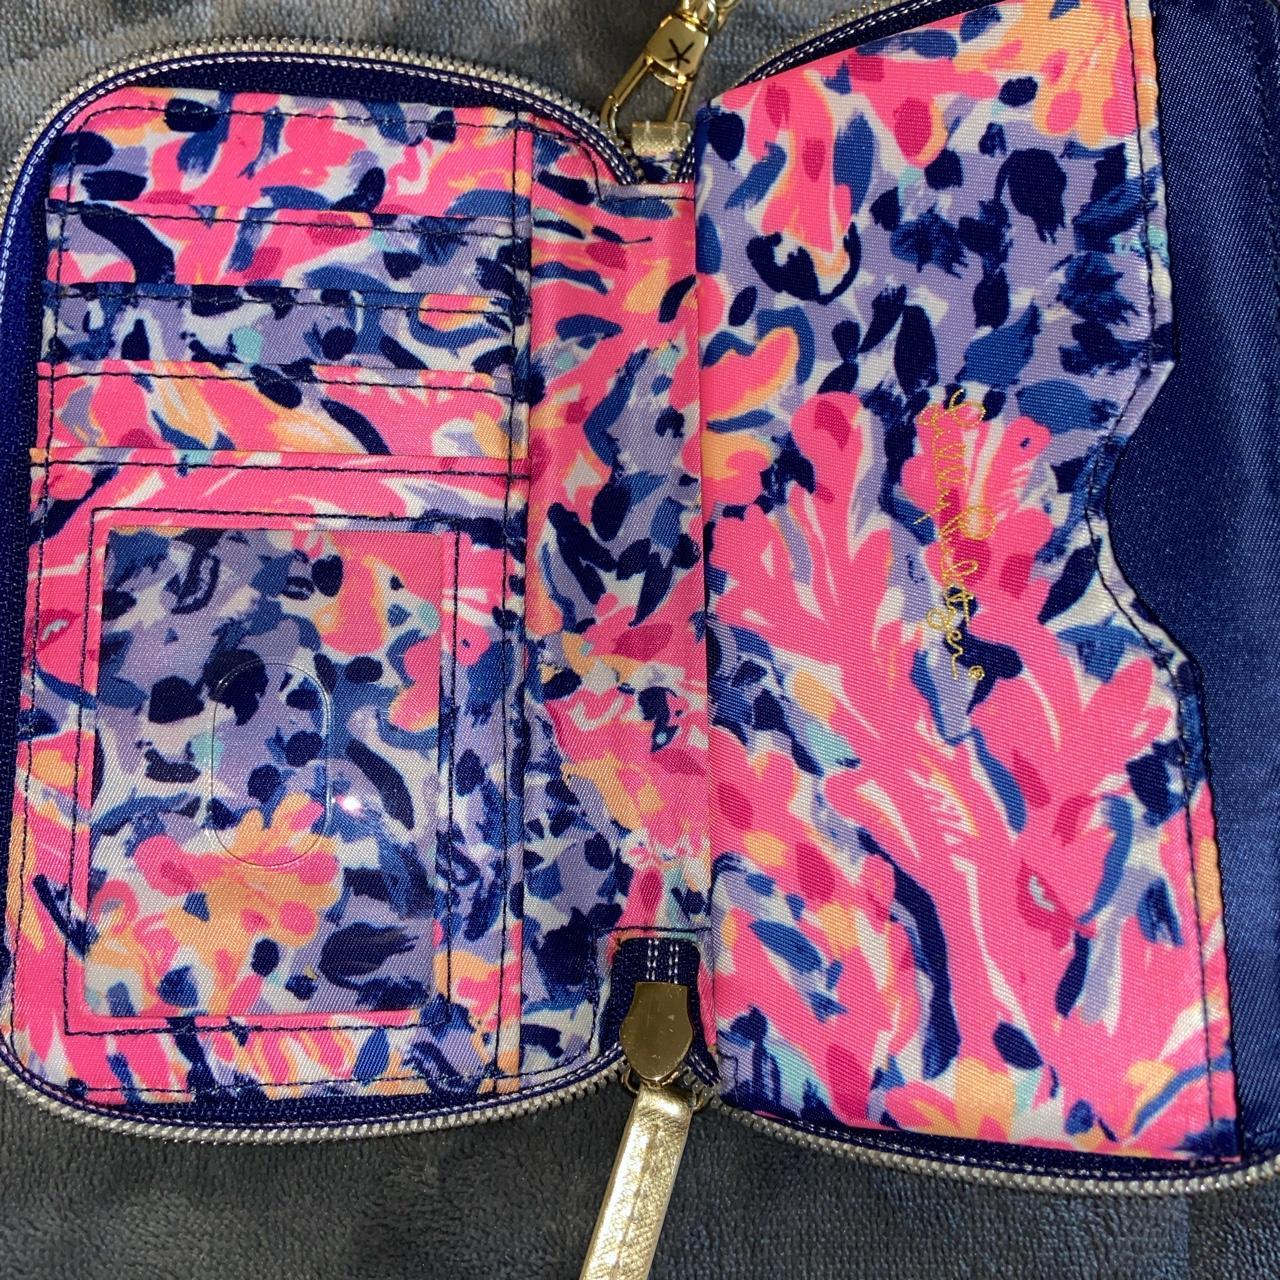 Lilly Pulitzer Women's Pink and Navy Wallet-purses (3)